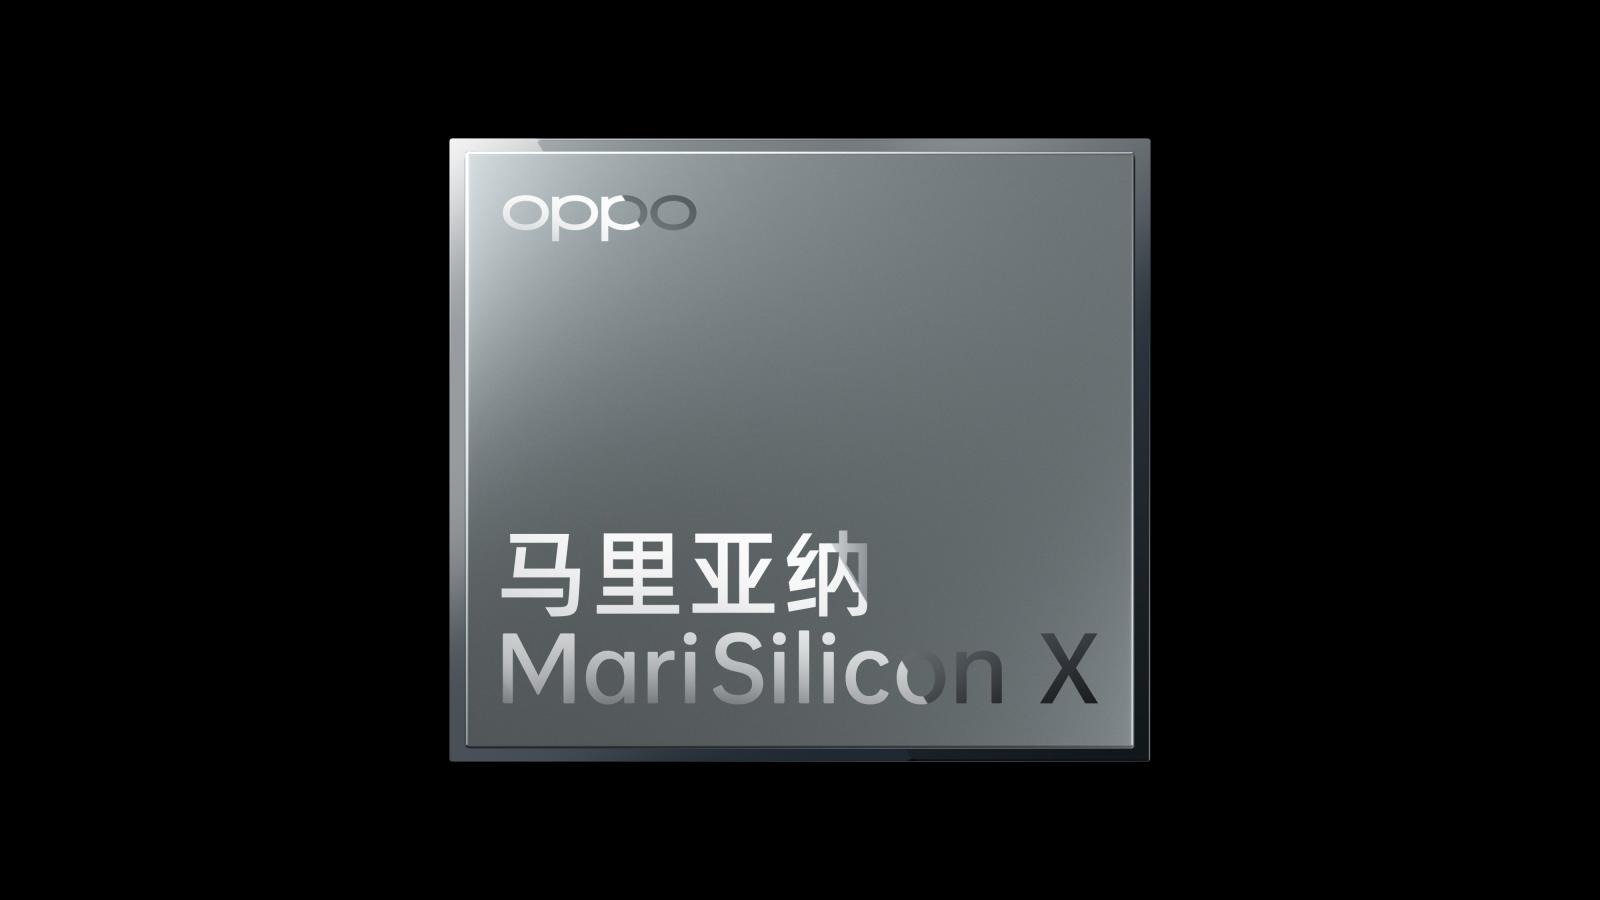 1. OPPO today officially announc